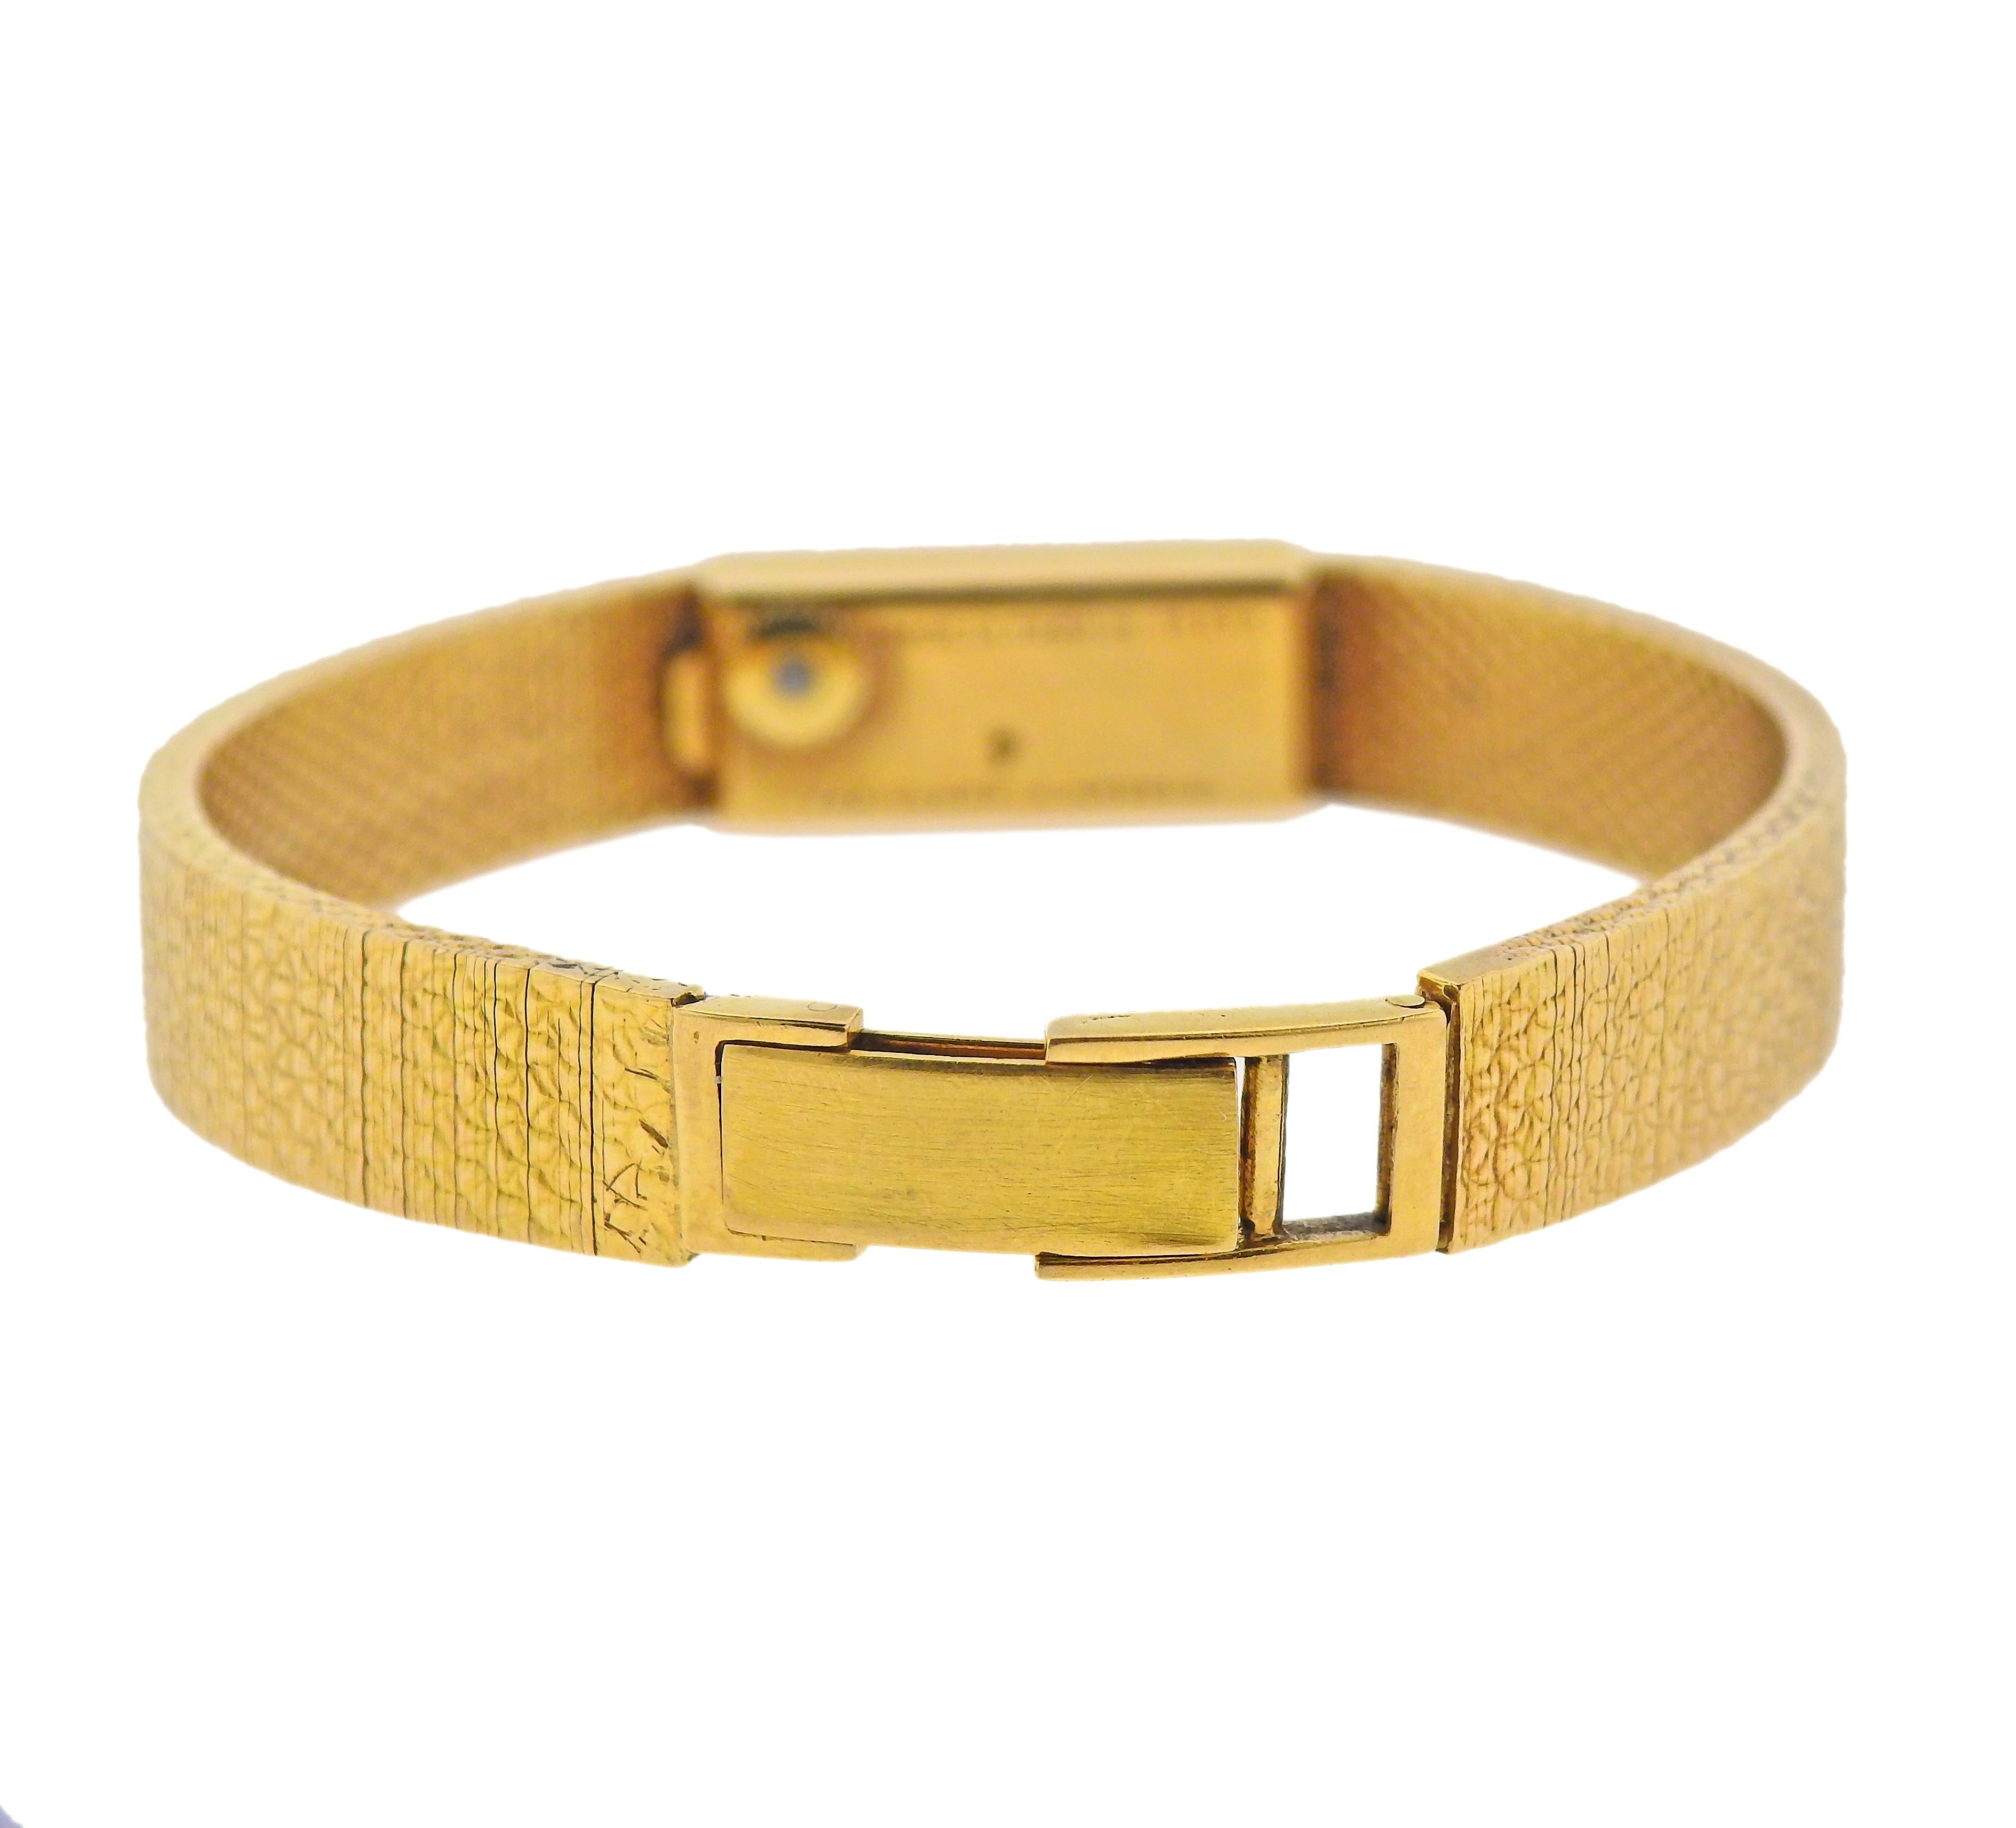 Van Cleef & Arpels Gold Backwind Watch Bracelet In Excellent Condition For Sale In New York, NY